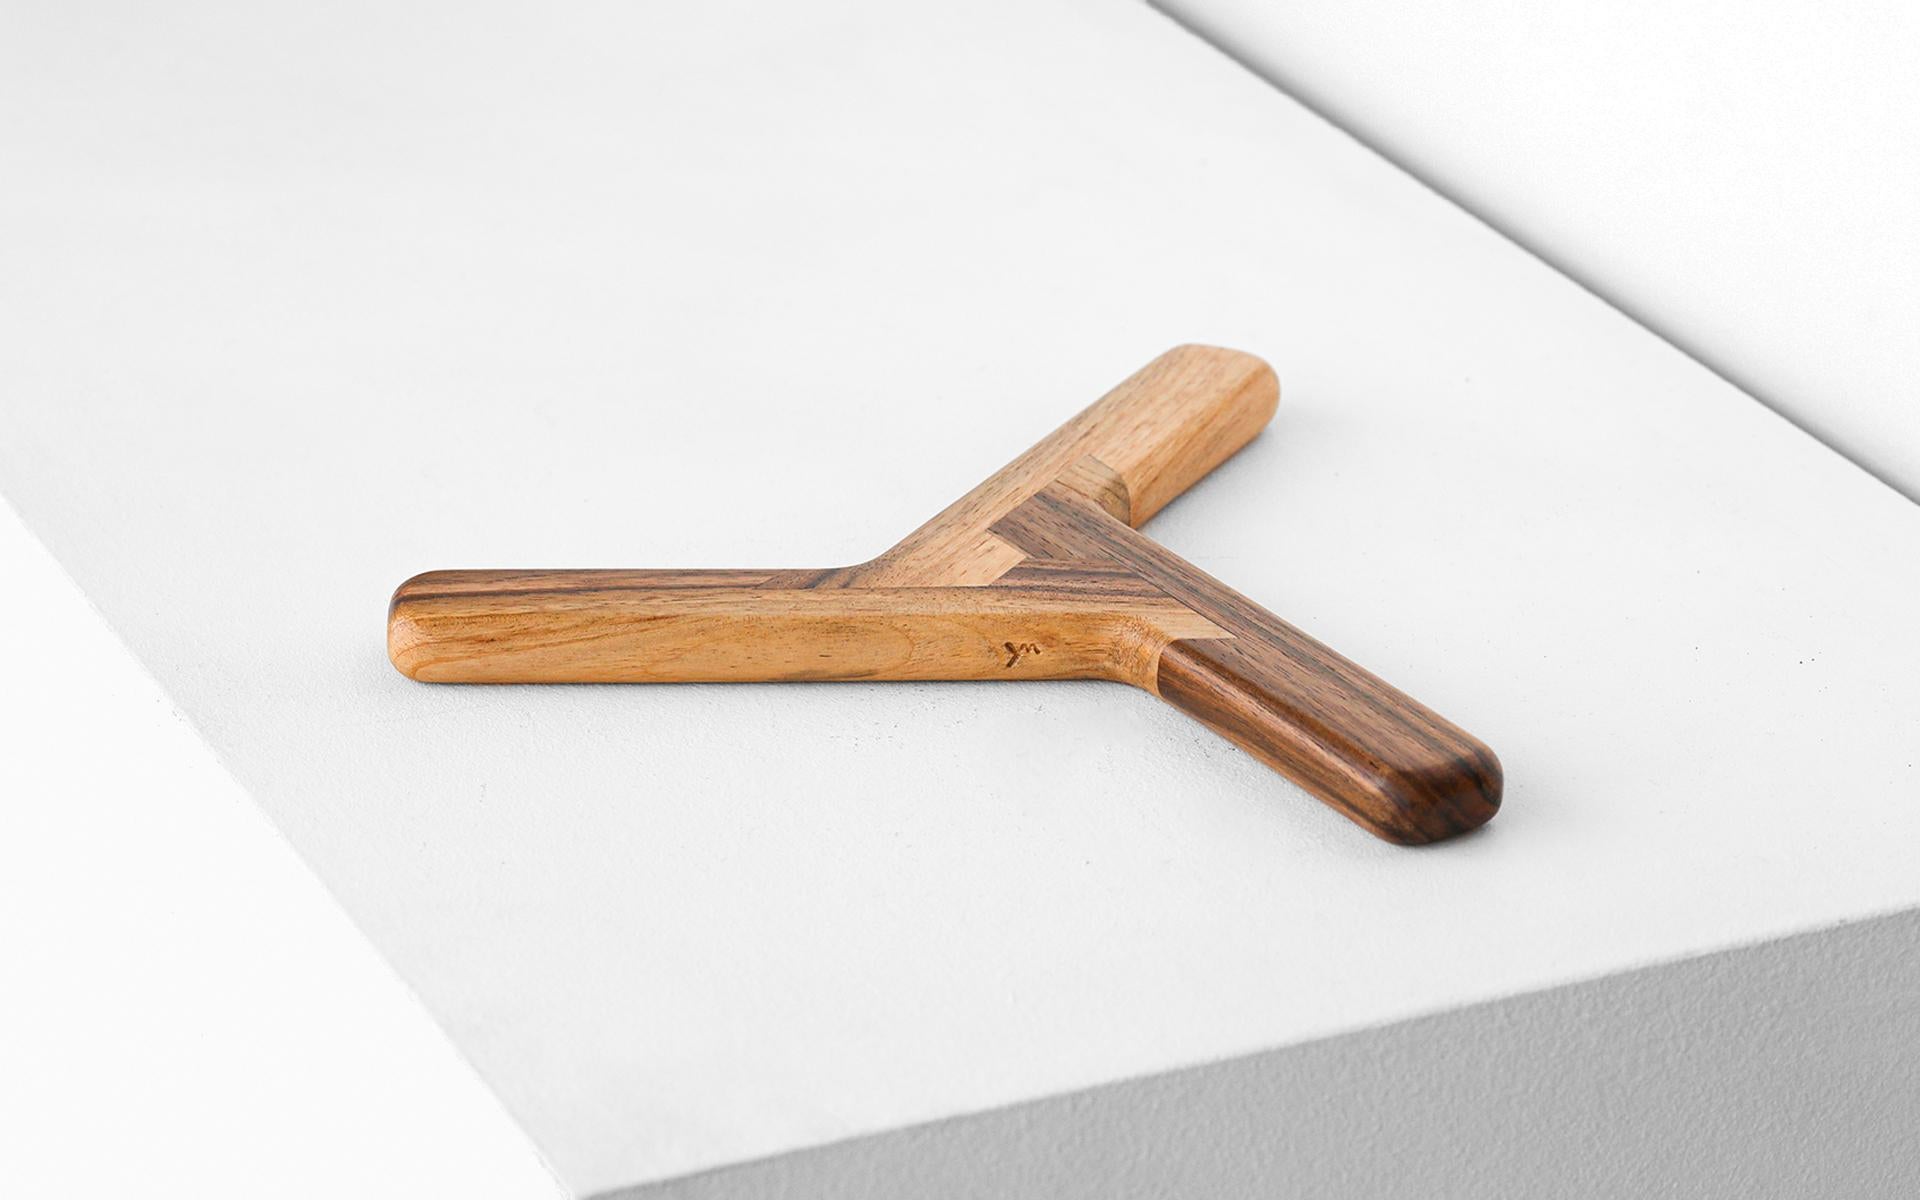 A combination of luxury and sustainability, the Vita Nova trivet was created to give new life to wood scraps.

With a simple and strong design, this piece is composed of three identical parts connected by a carefully handmade Japanese